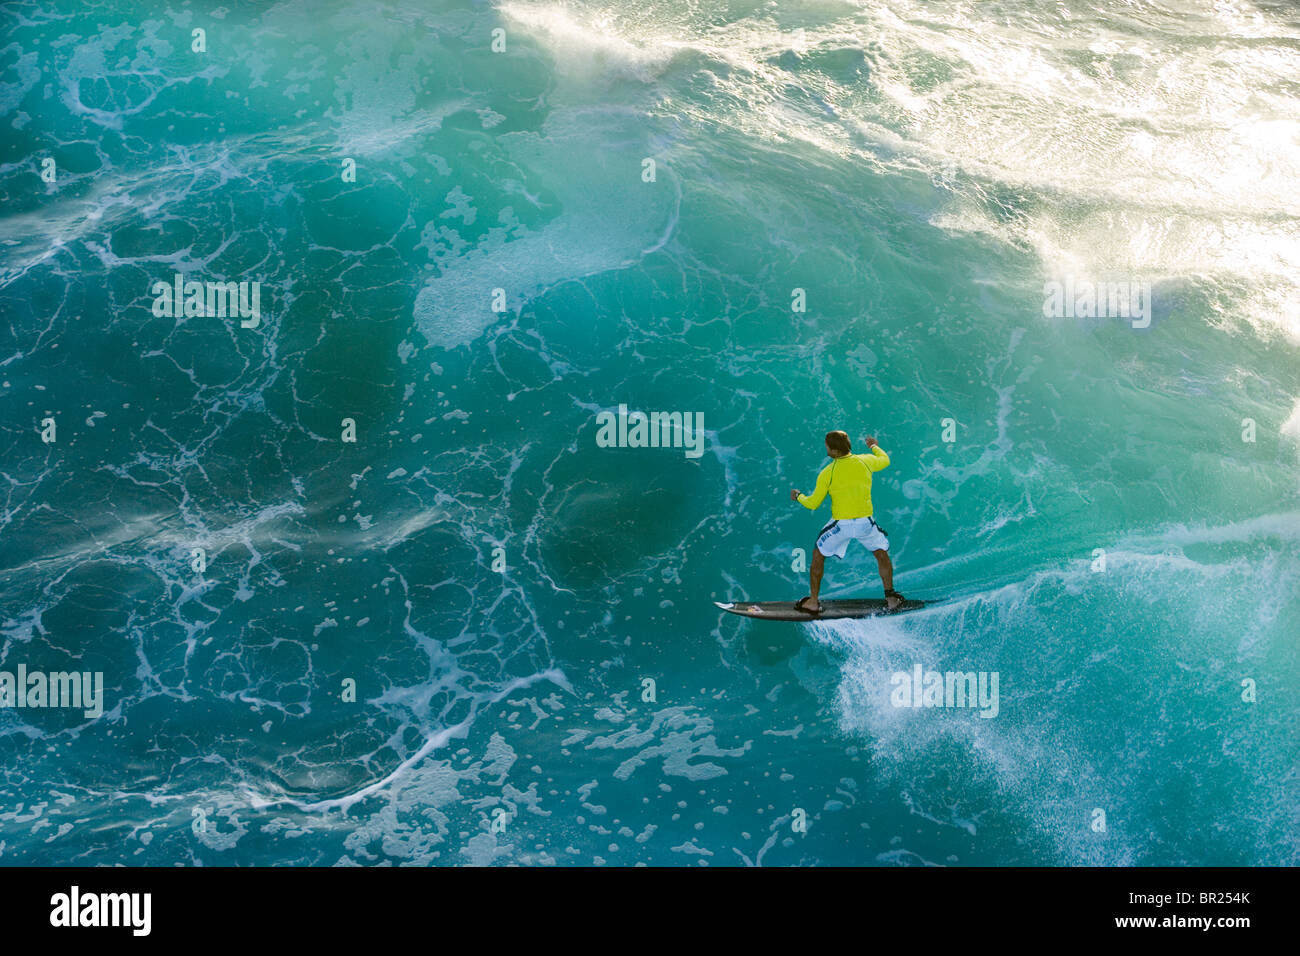 man tow-surfing on the north shore of Oahu, Hawaii Stock Photo